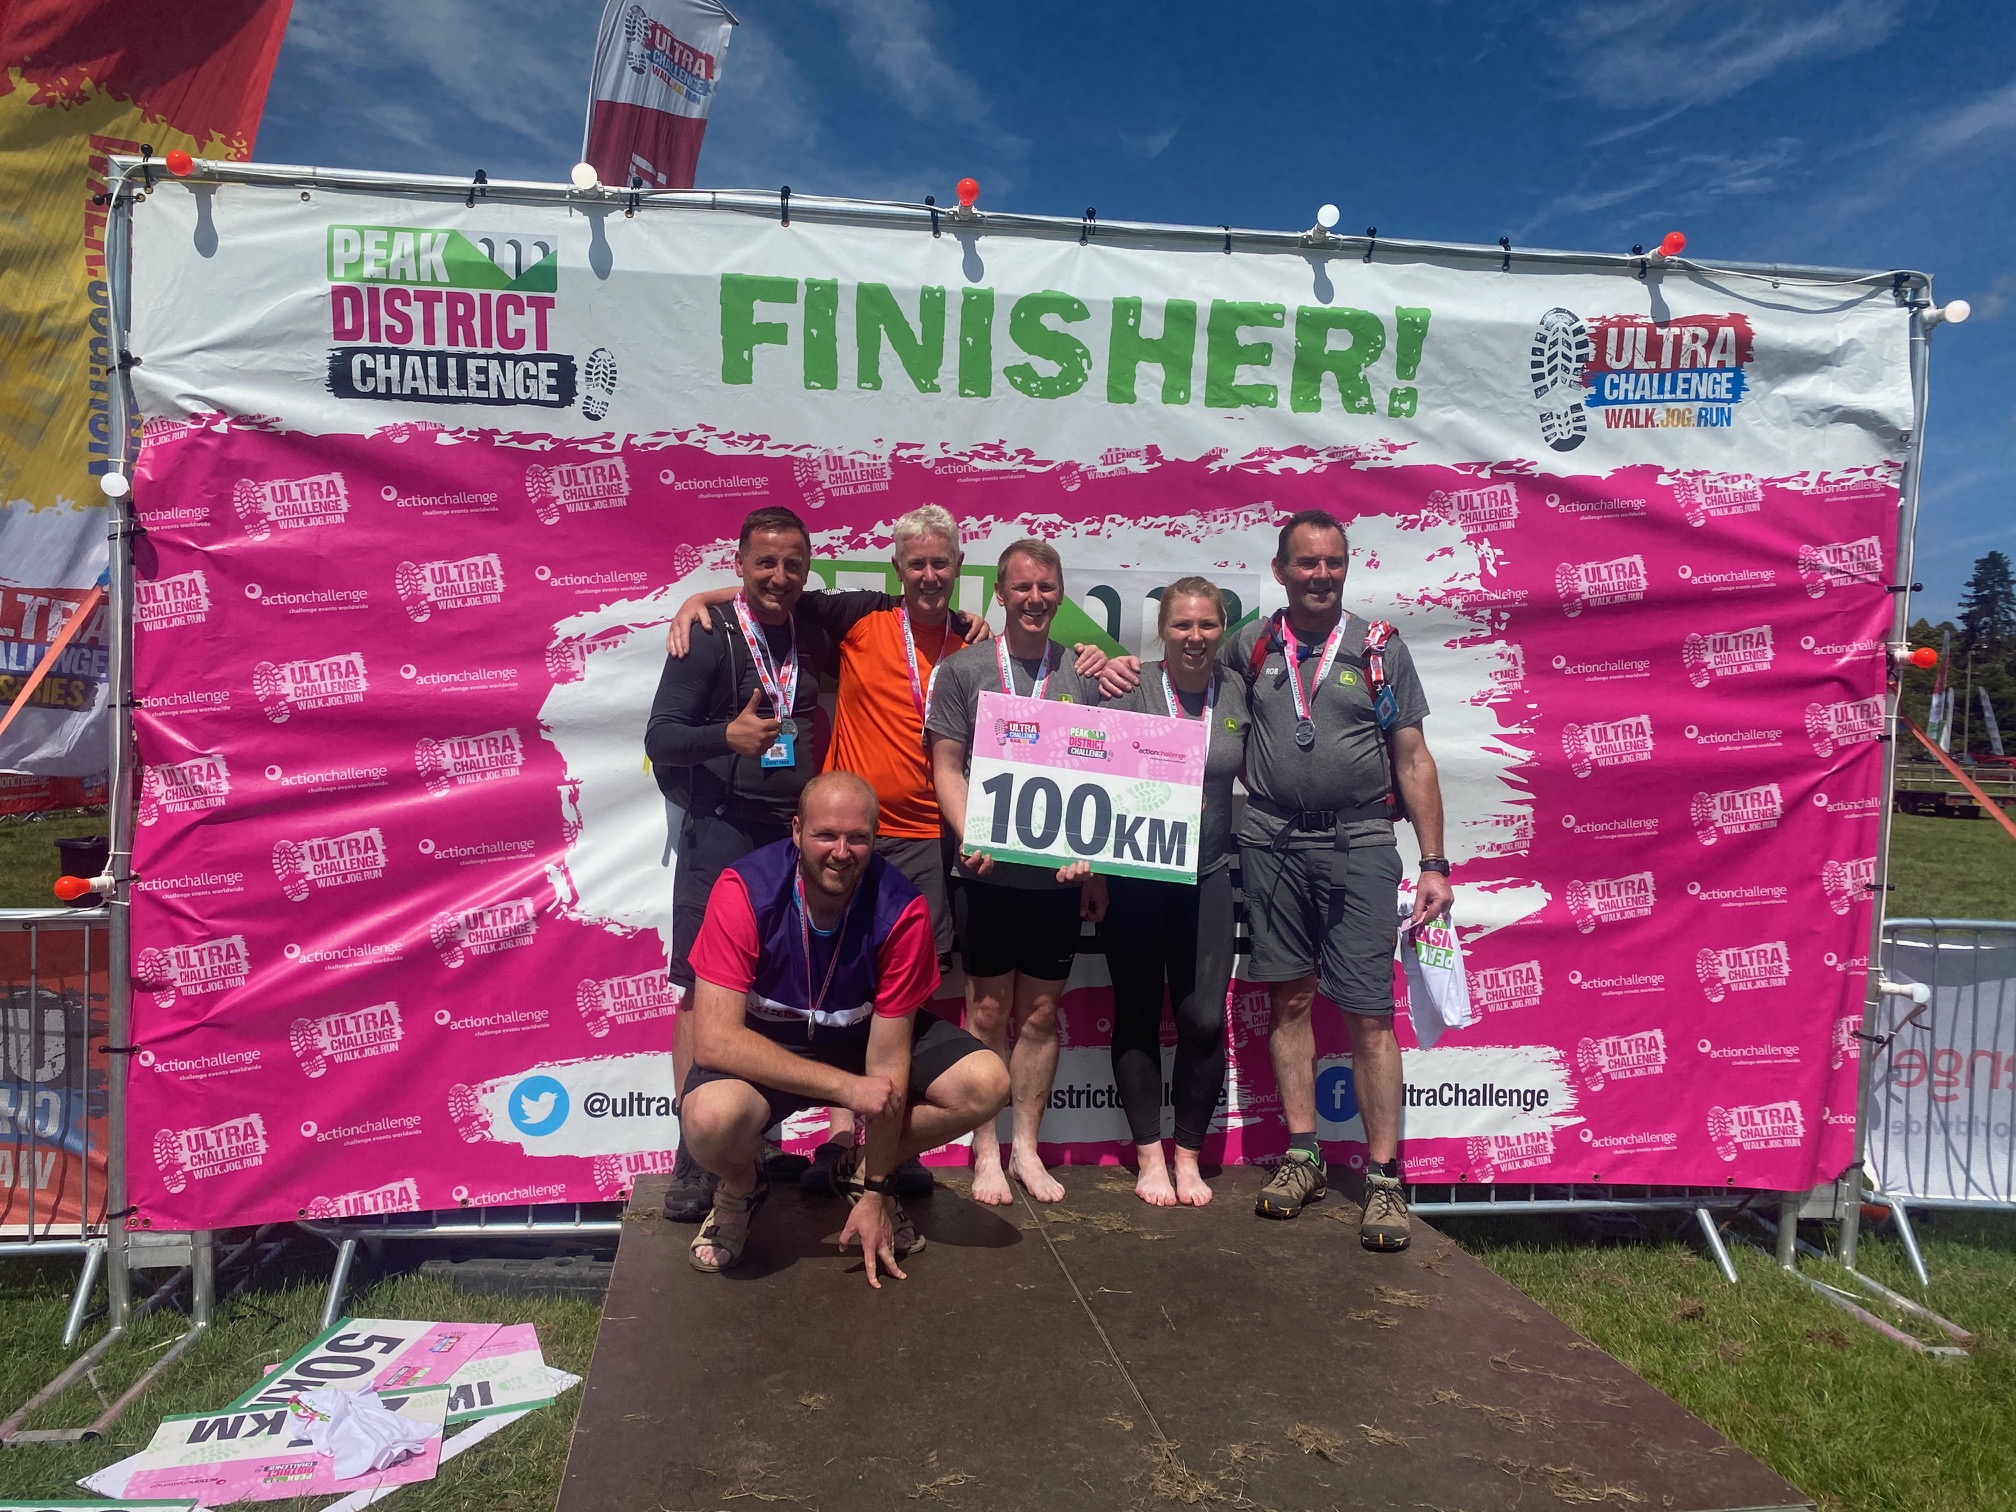 Some of the team completed the 100km course